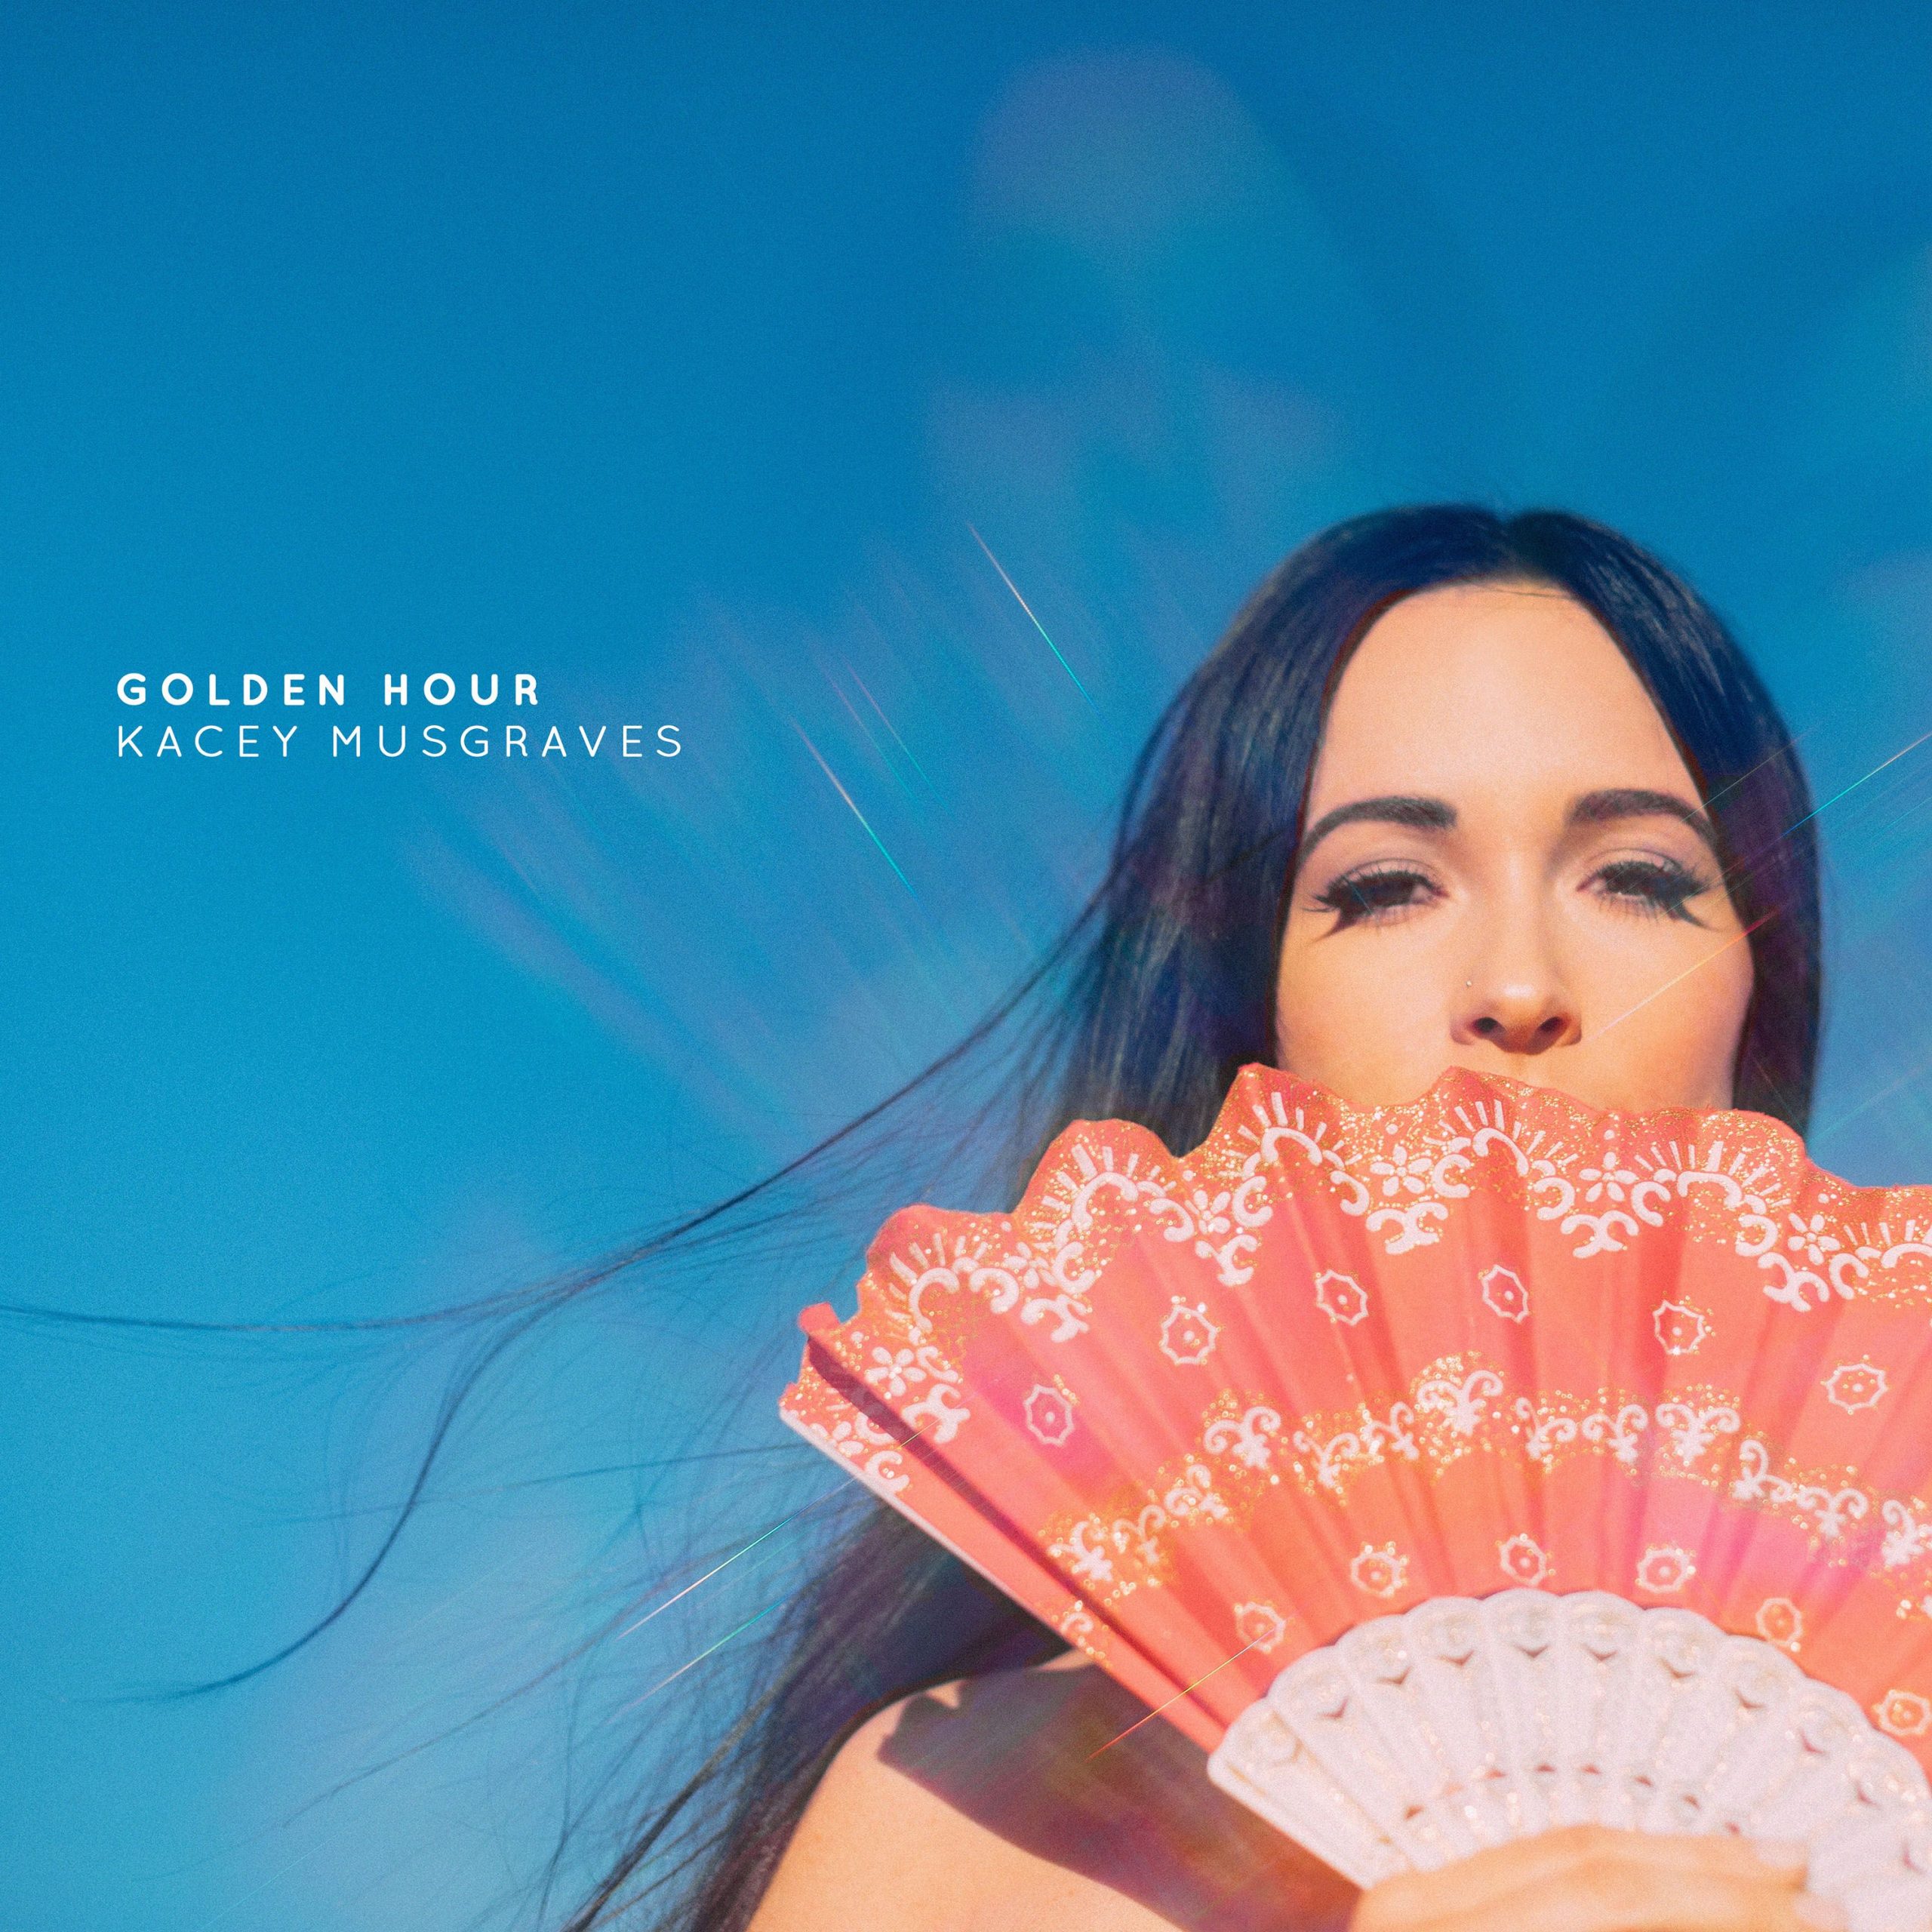 KACEY MUSGRAVES RELEASES “SPACE COWBOY” AND “BUTTERFLIES,” NEW MUSIC FROM HER FORTHCOMING ALBUM